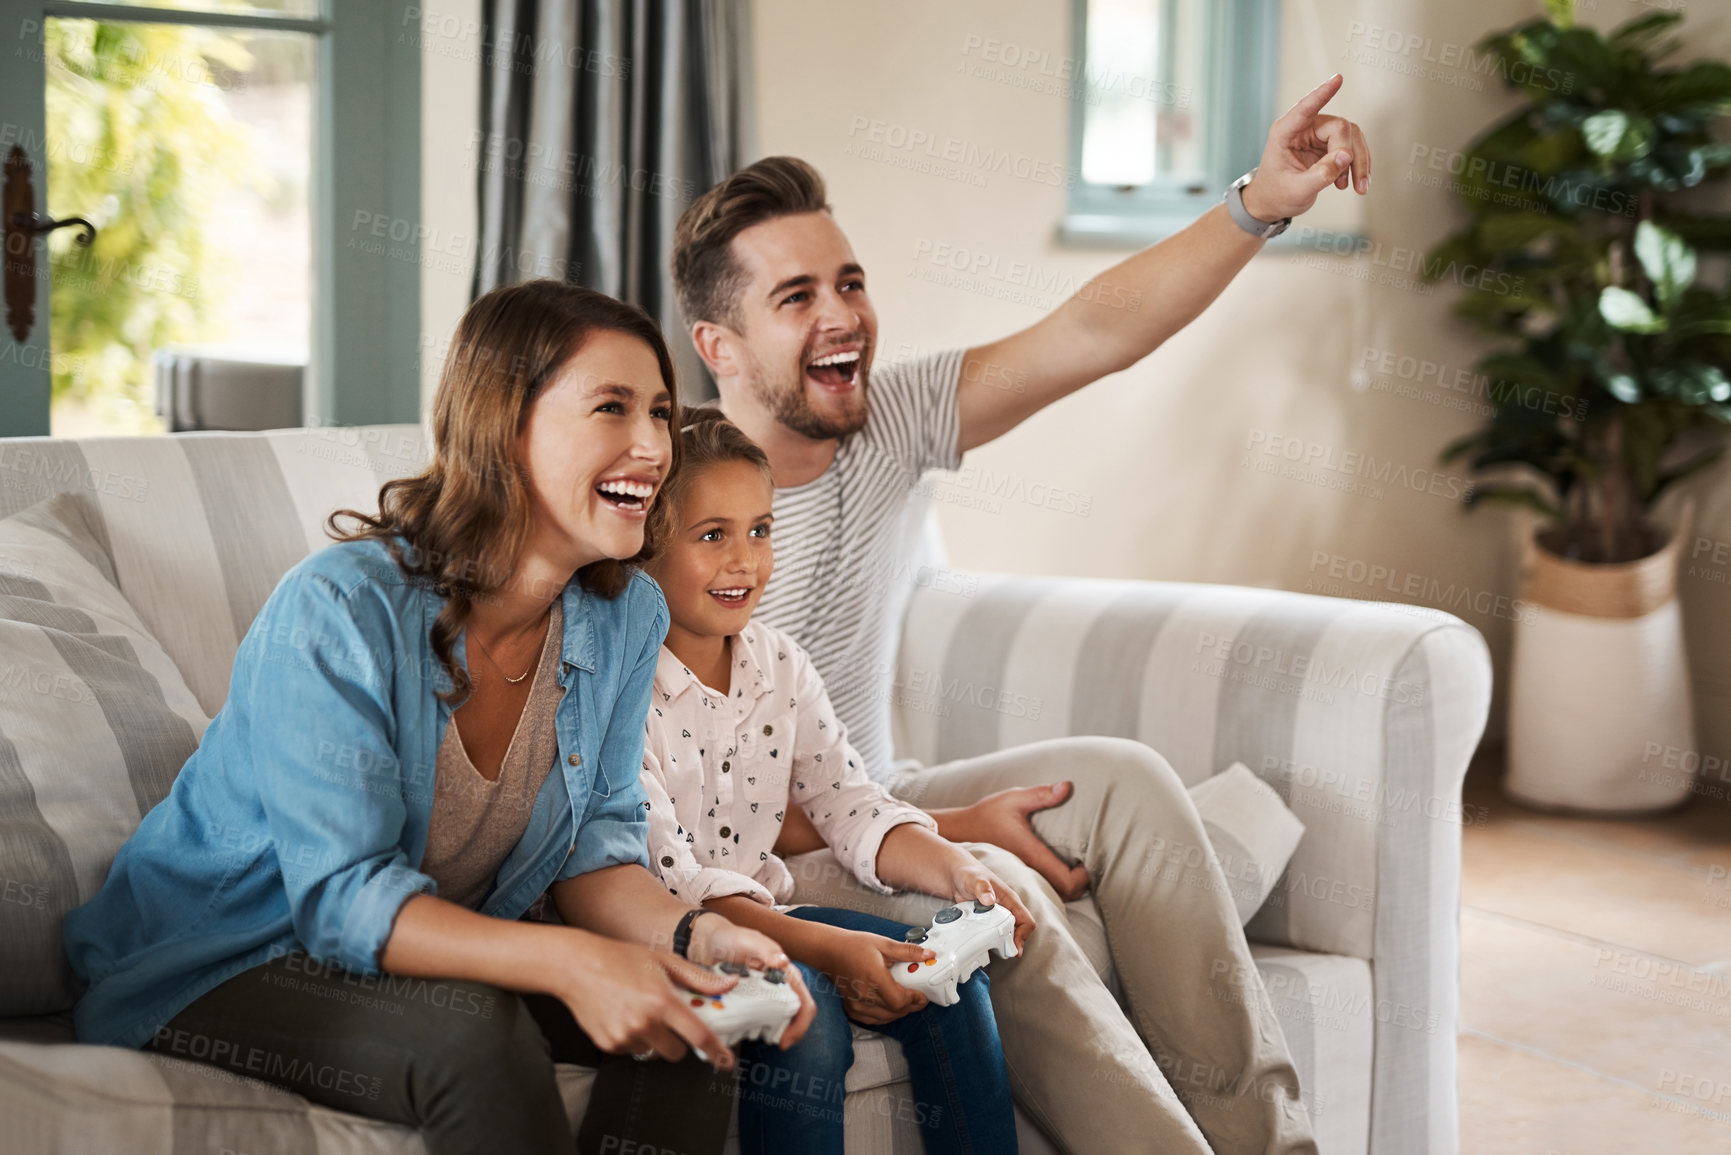 Buy stock photo Shot of a happy young family playing video games on the sofa at home